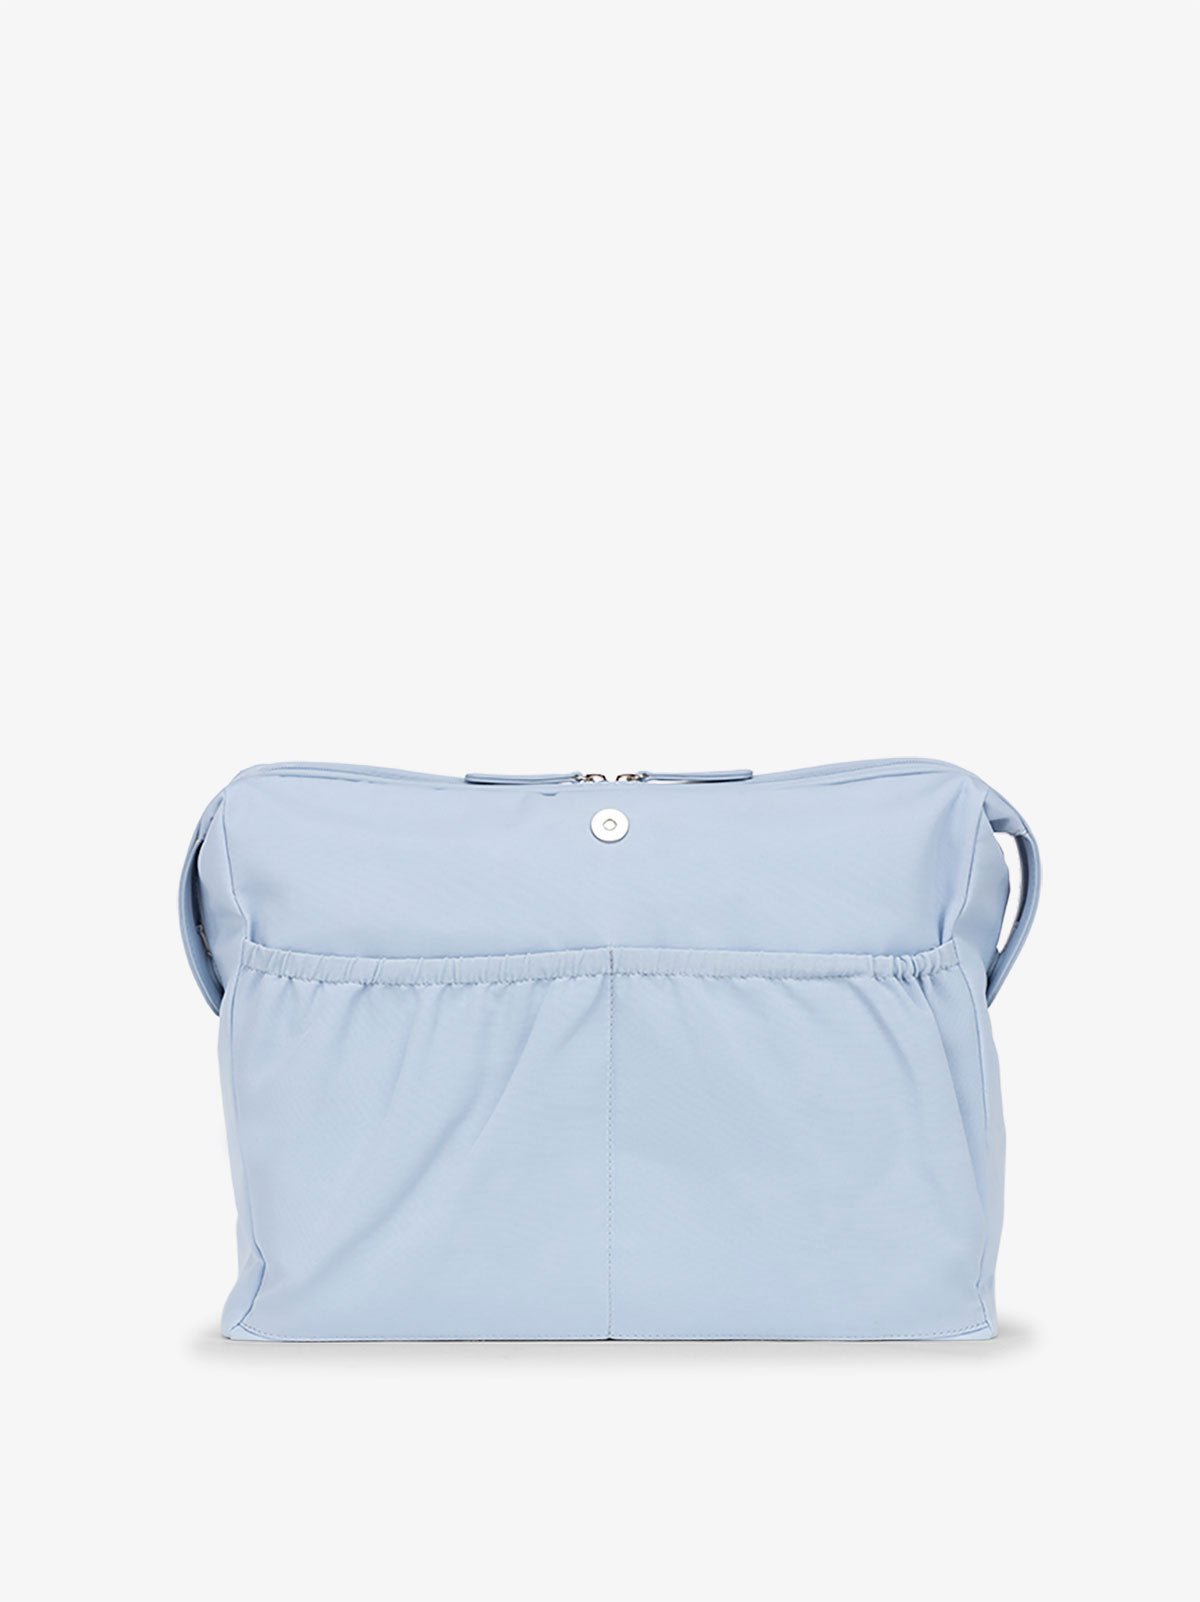 CALPAK Haven Laptop Tote bag with detachable laptop sleeve with pockets in light blue